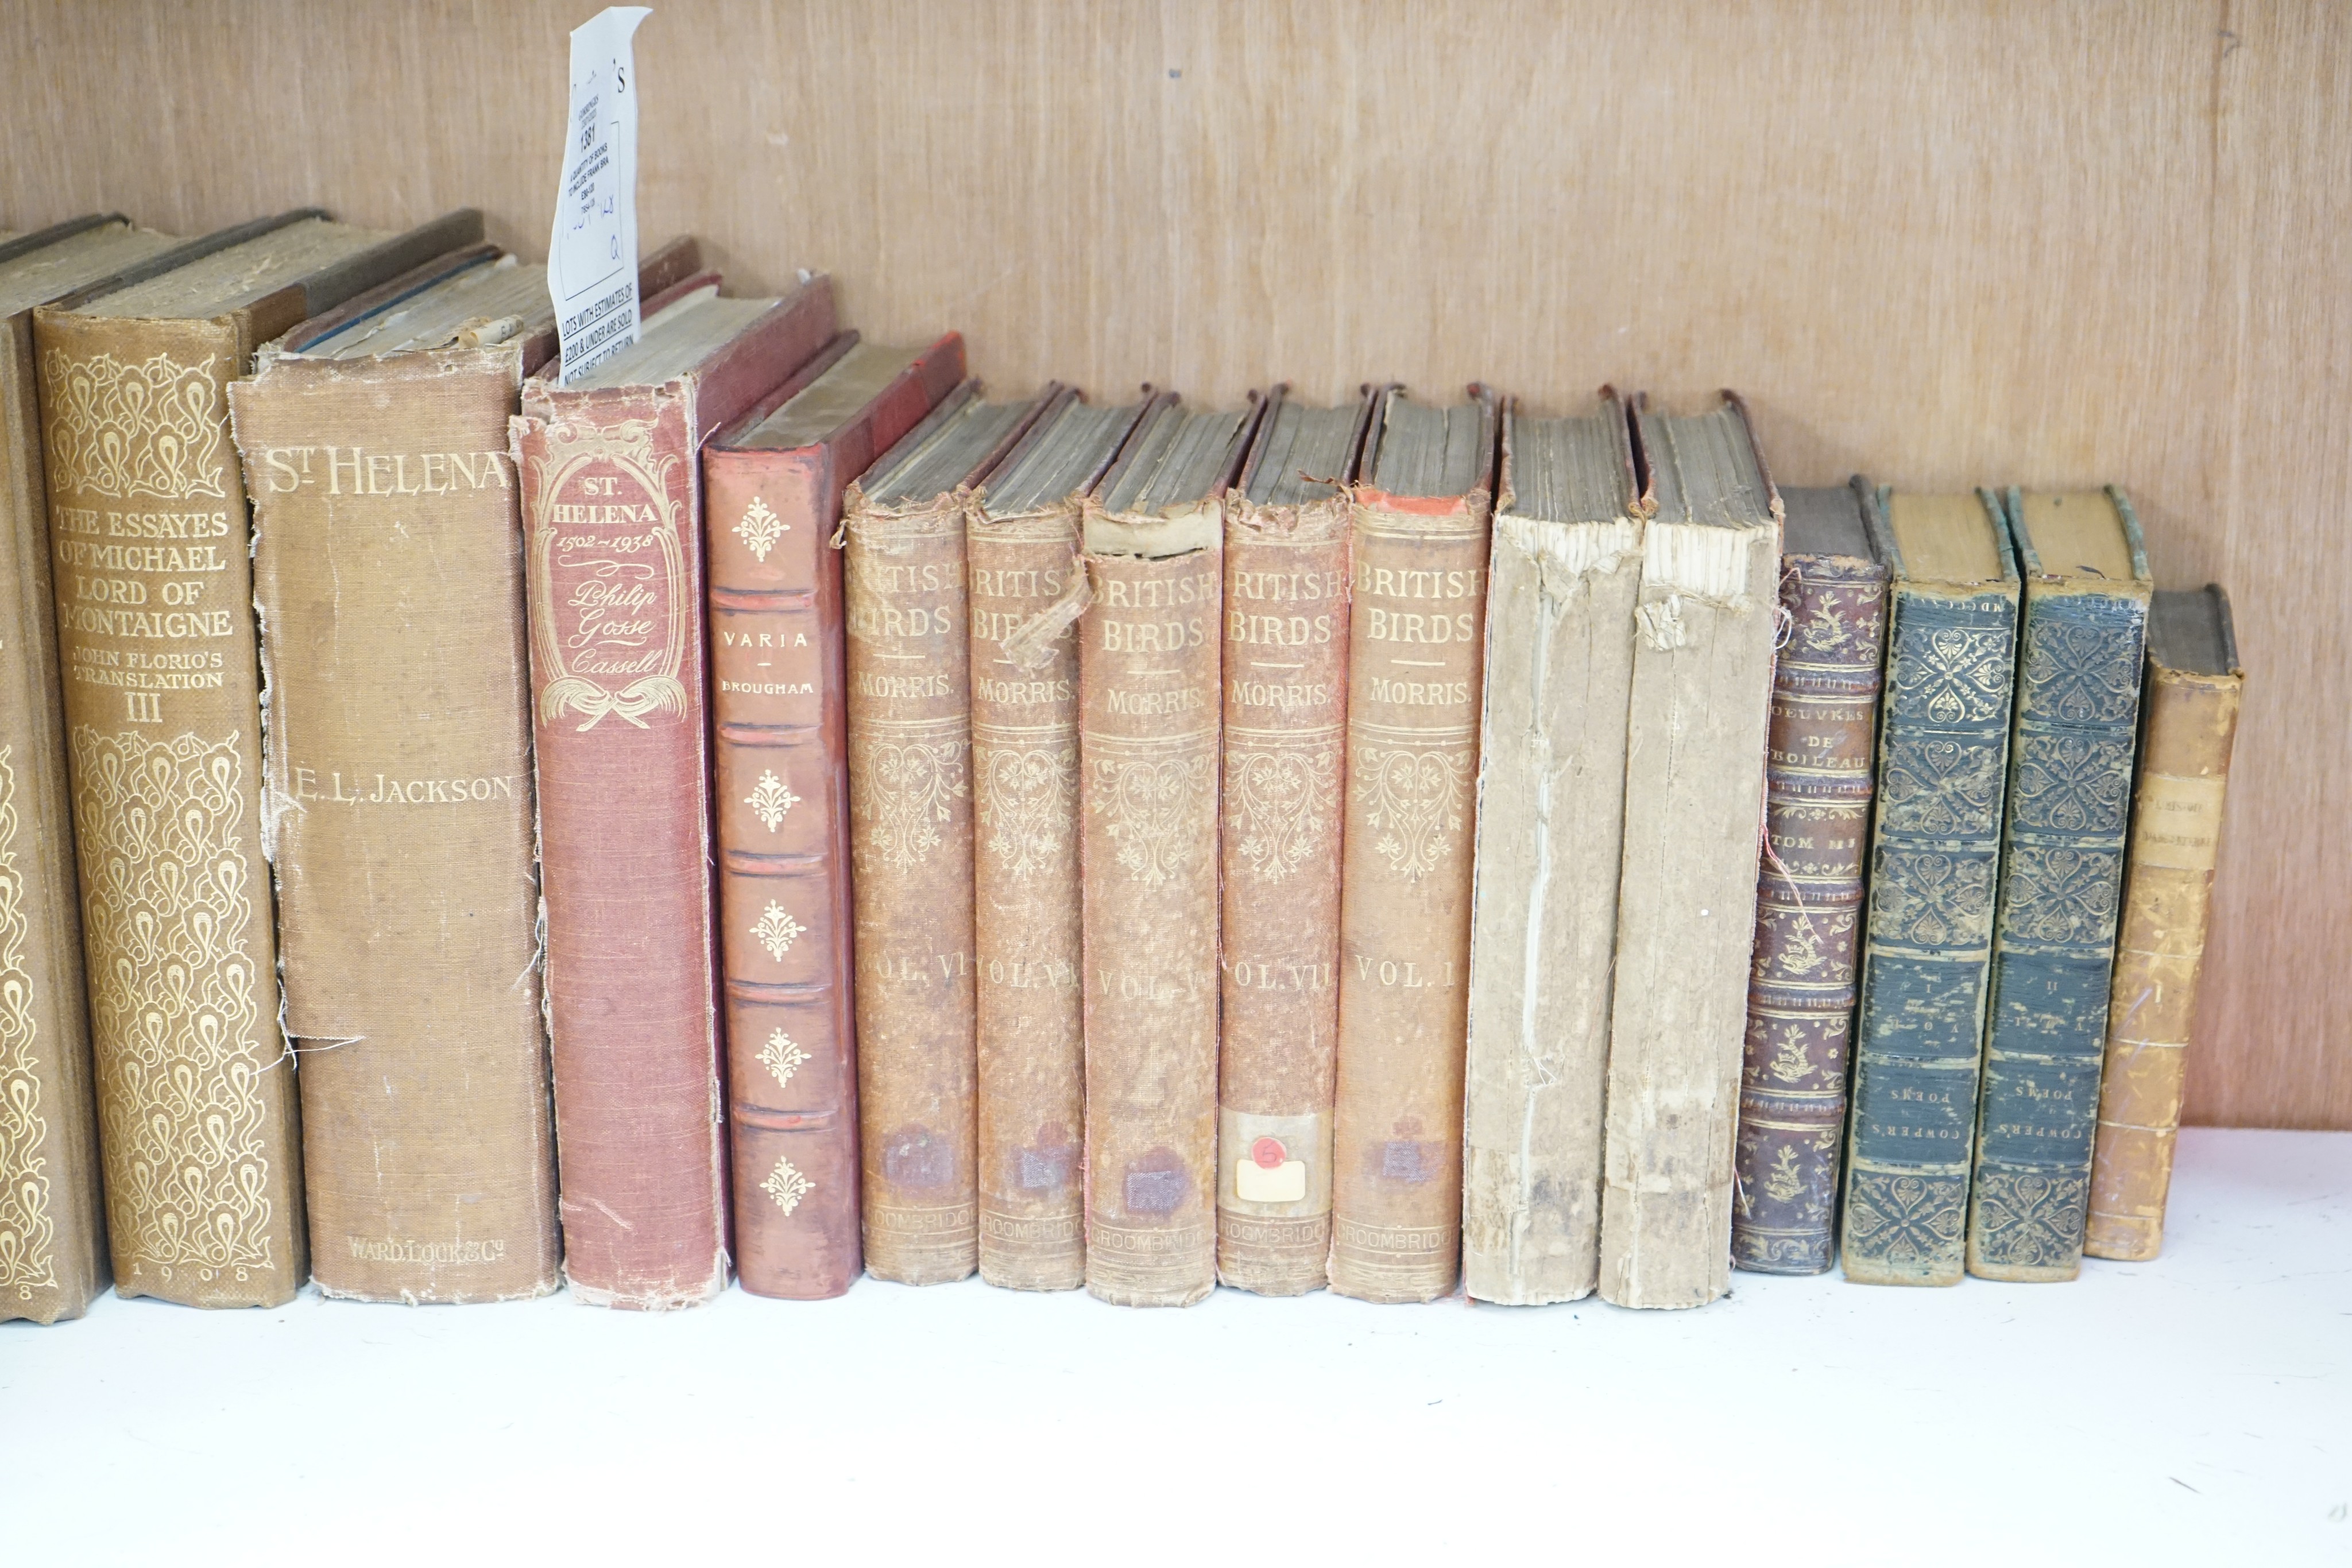 A quantity of books to include Frank Brangwyn, bibles, Janes merchant ships etc.